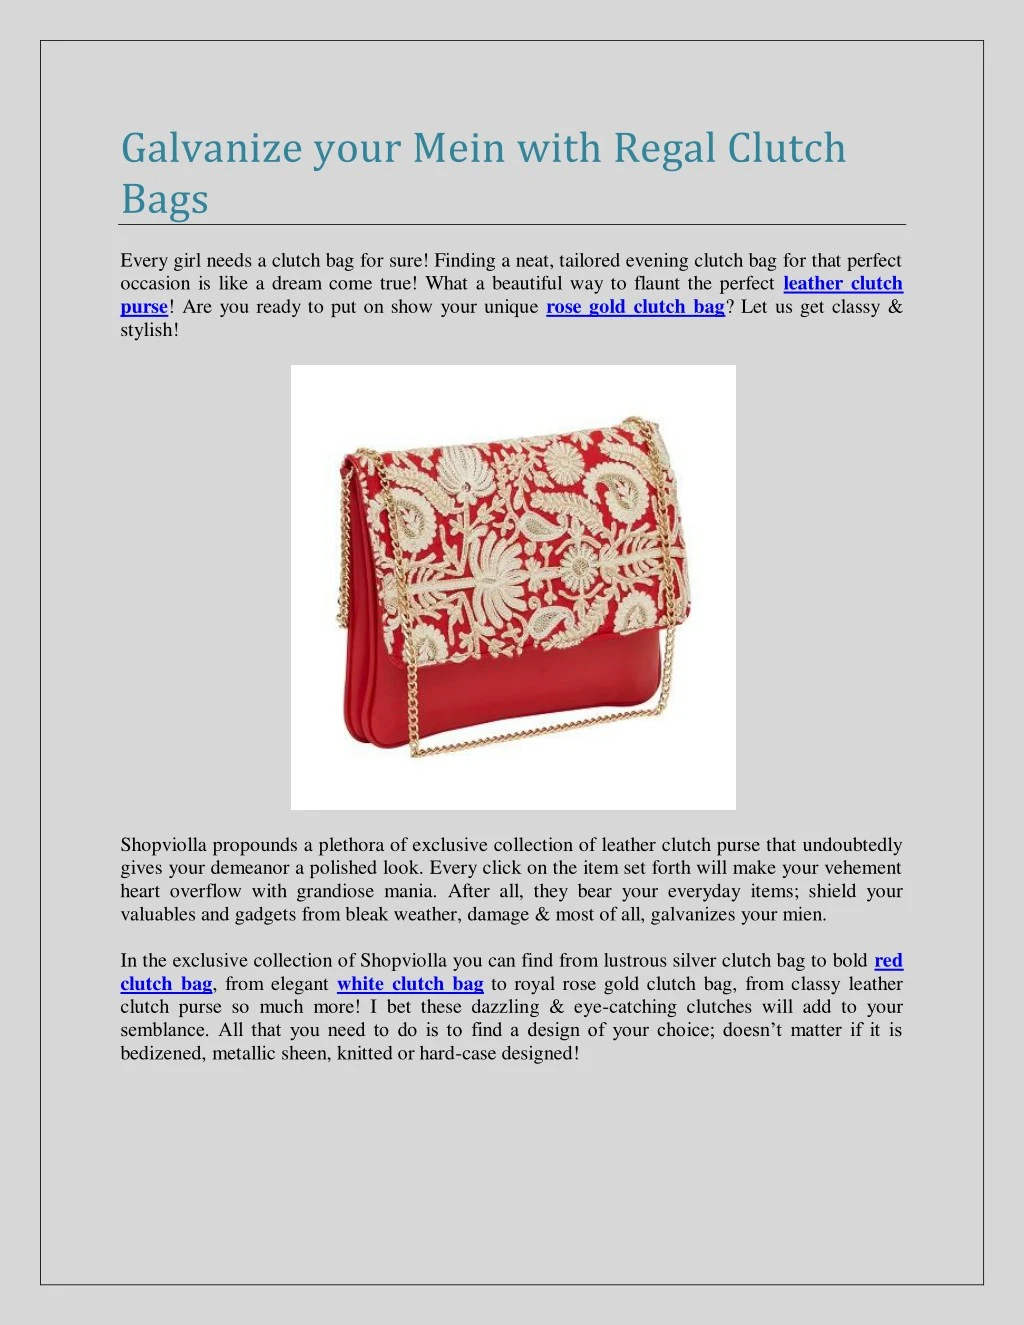 galvanize your mein with regal clutch bags